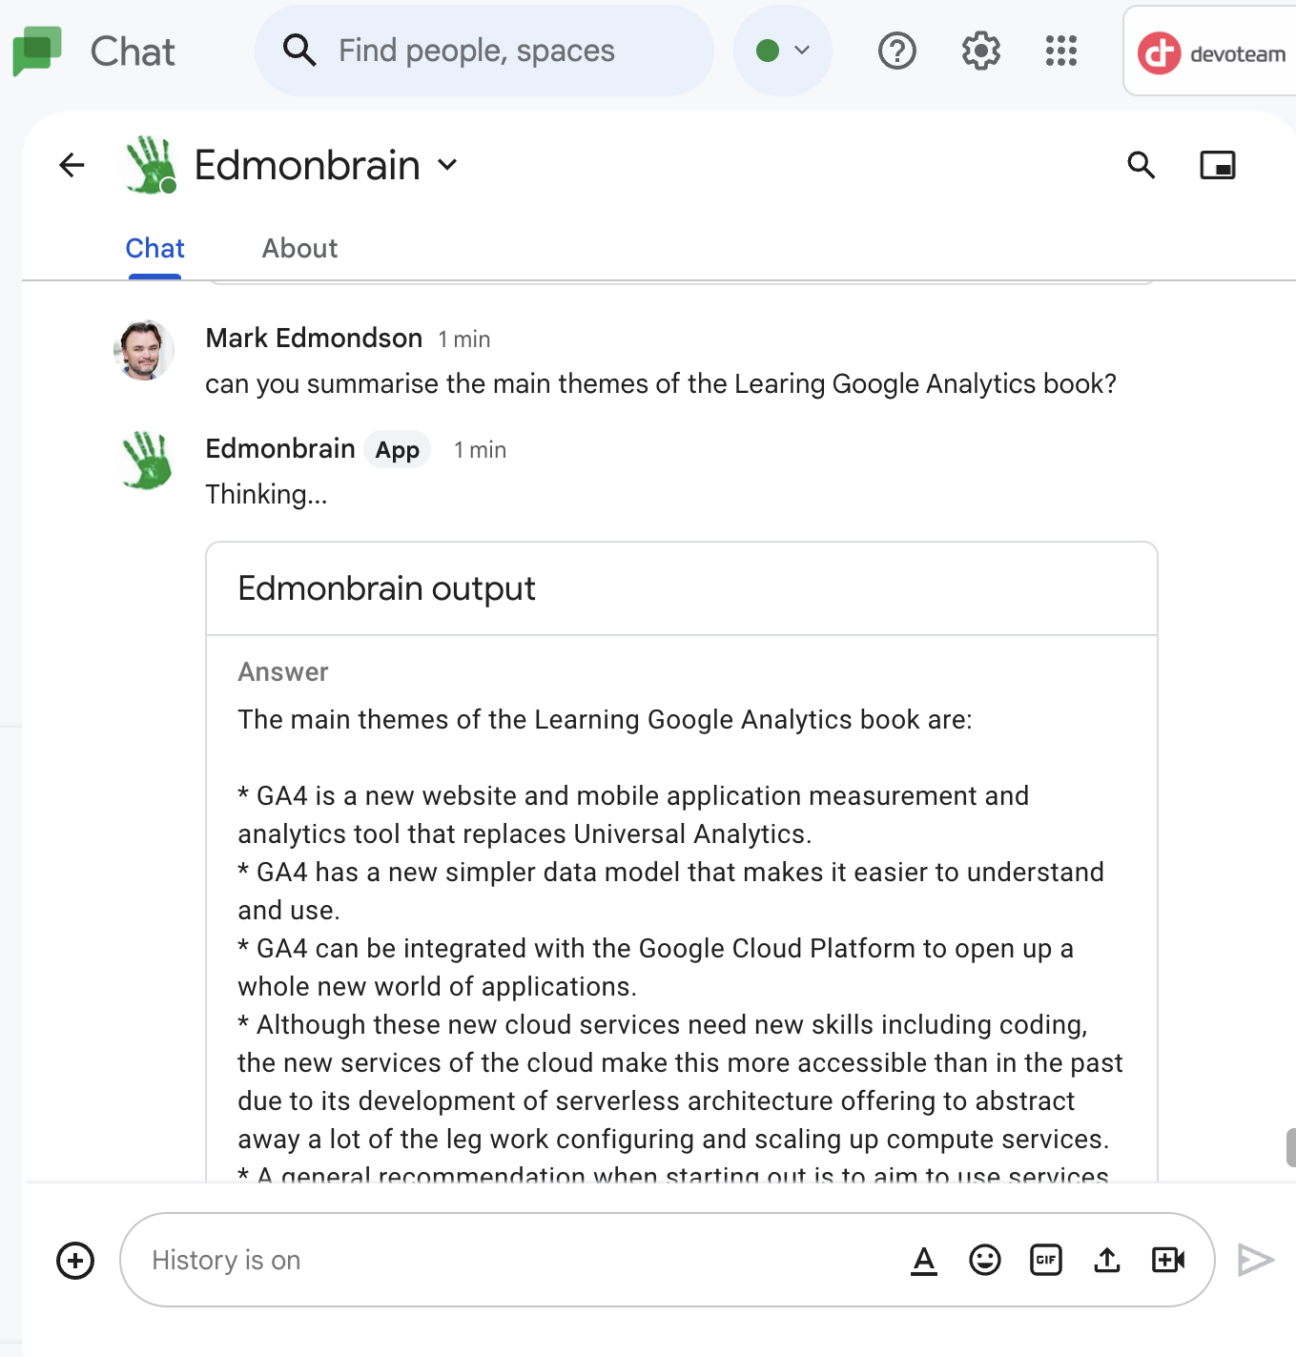 Google Workspace Updates: Hold separate conversations in Google Chat spaces  with in-line threading